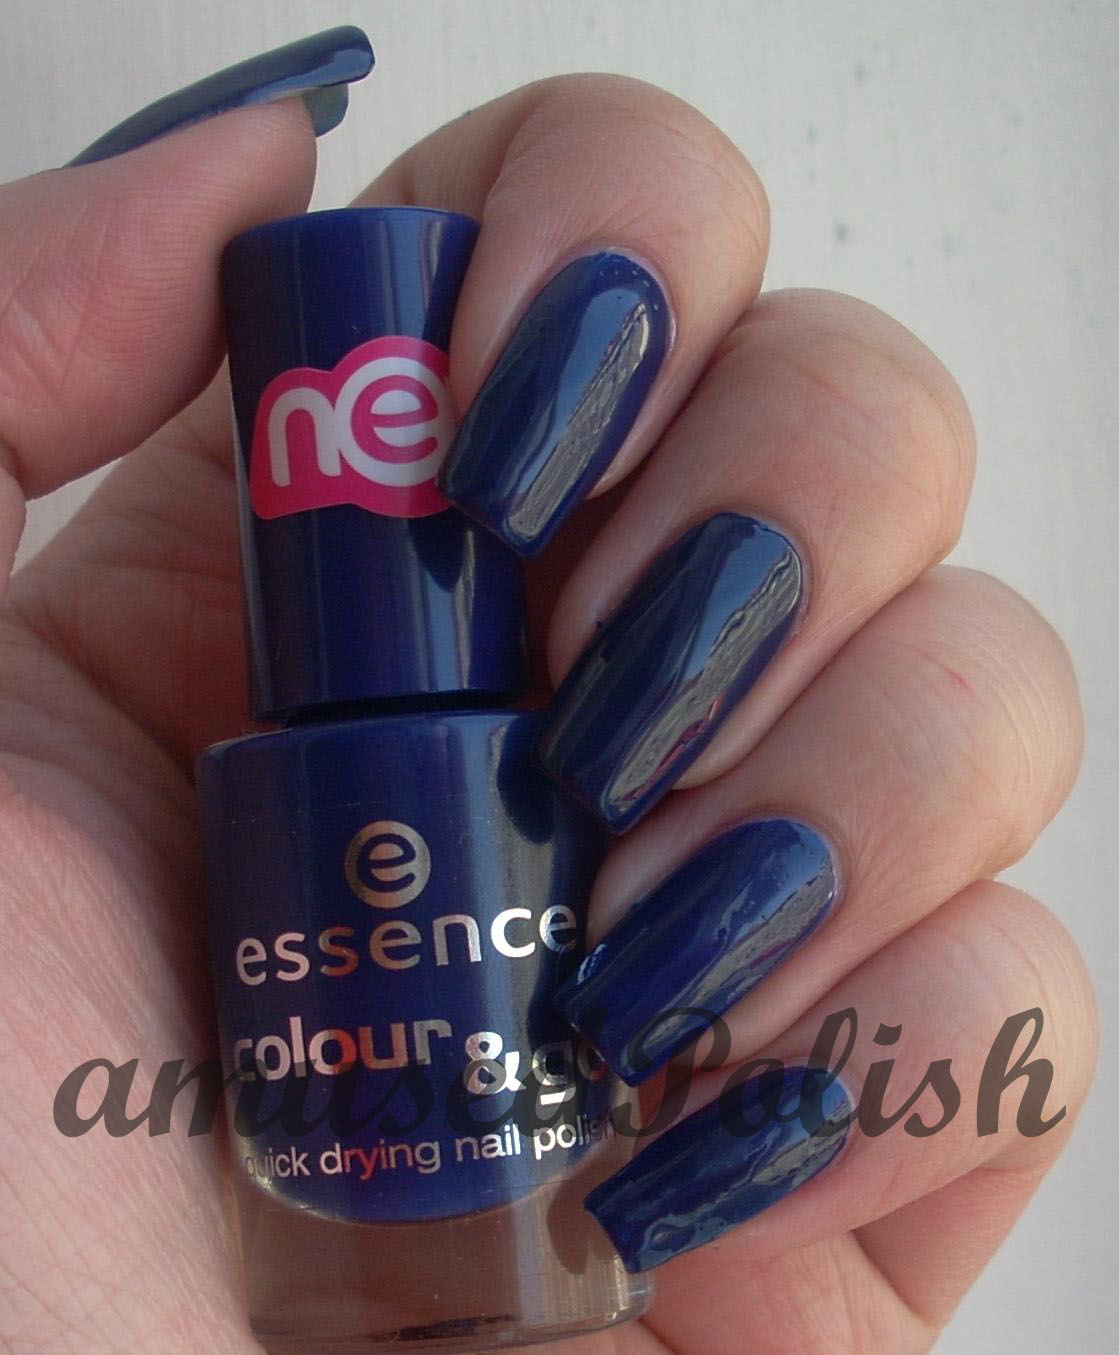 and some pictures with Etos Effect nails (first one with flash,